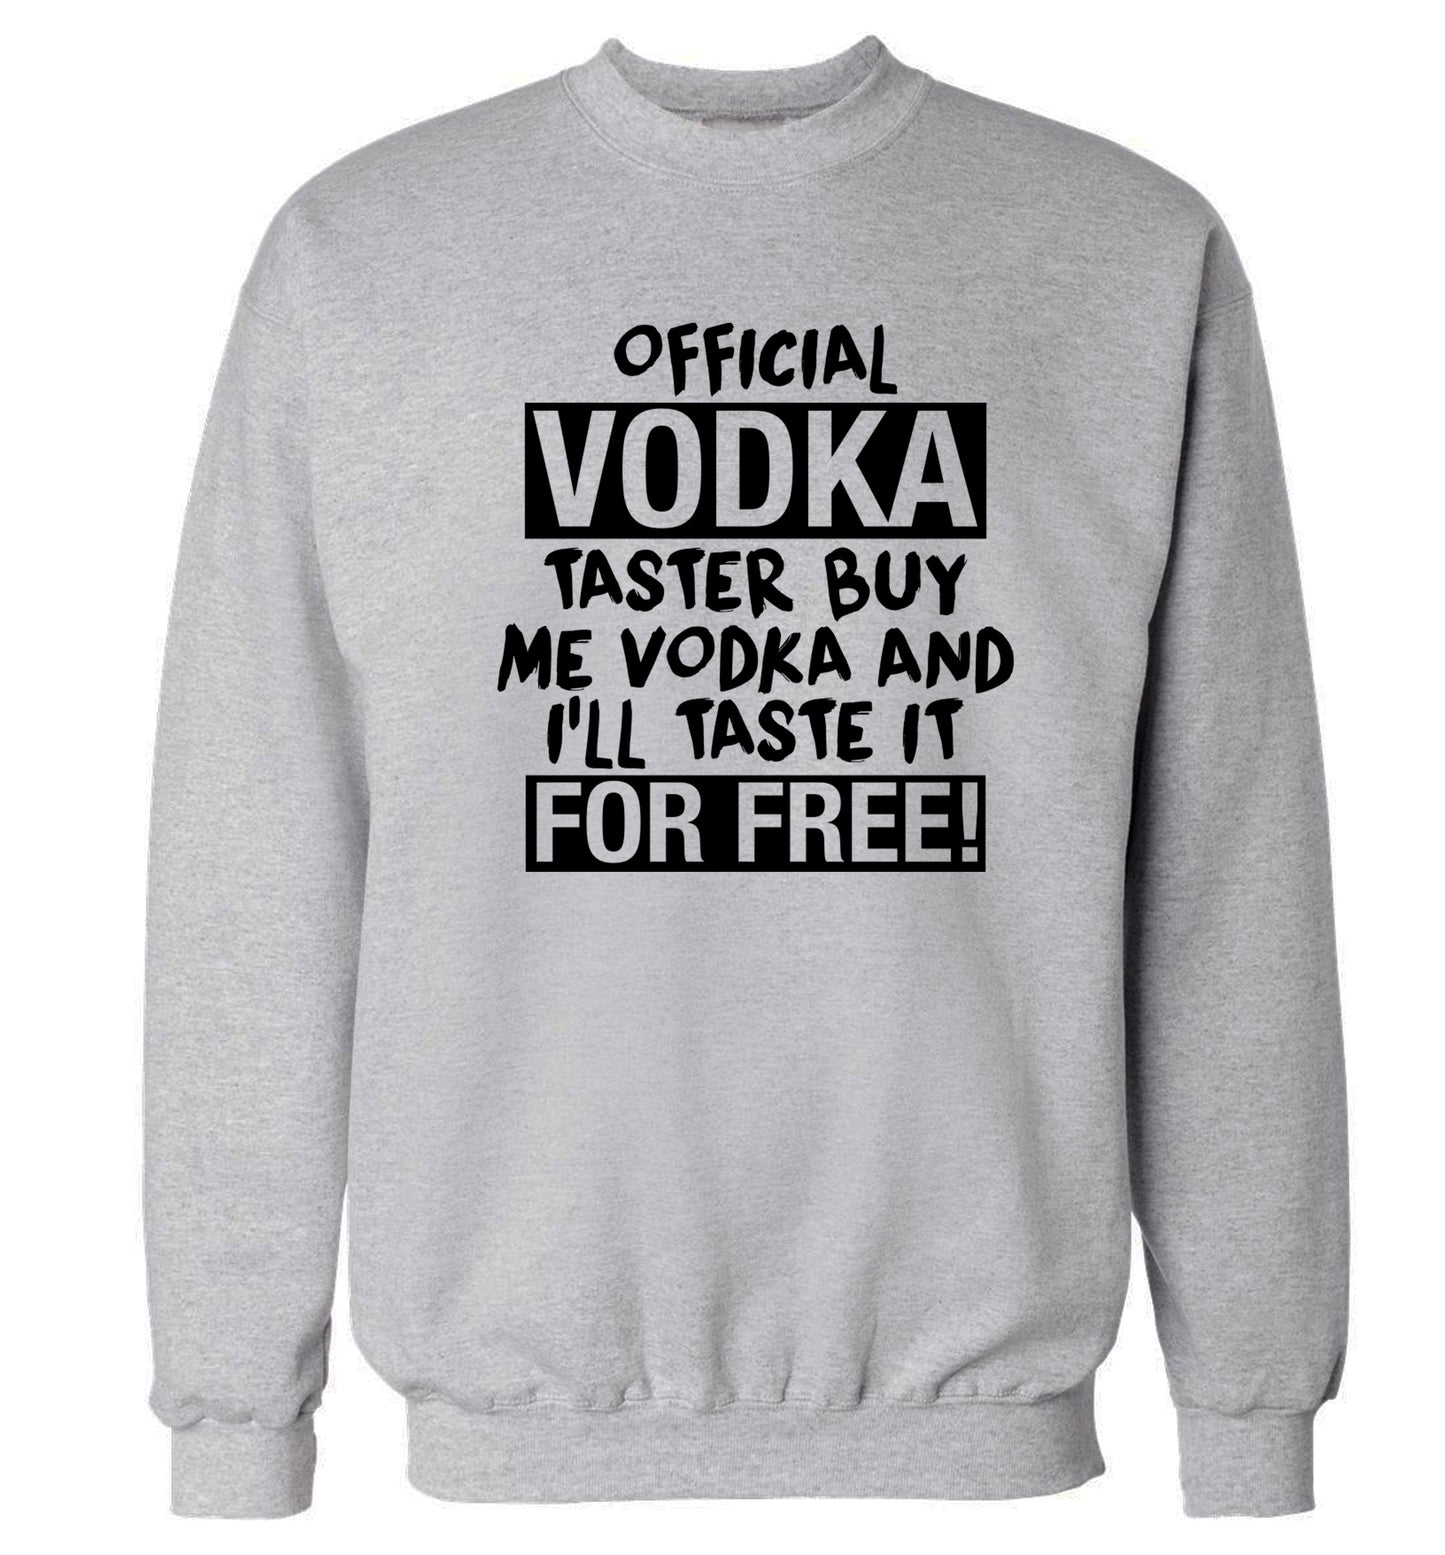 Official vodka taster buy me vodka and I'll taste it for free Adult's unisex grey Sweater 2XL